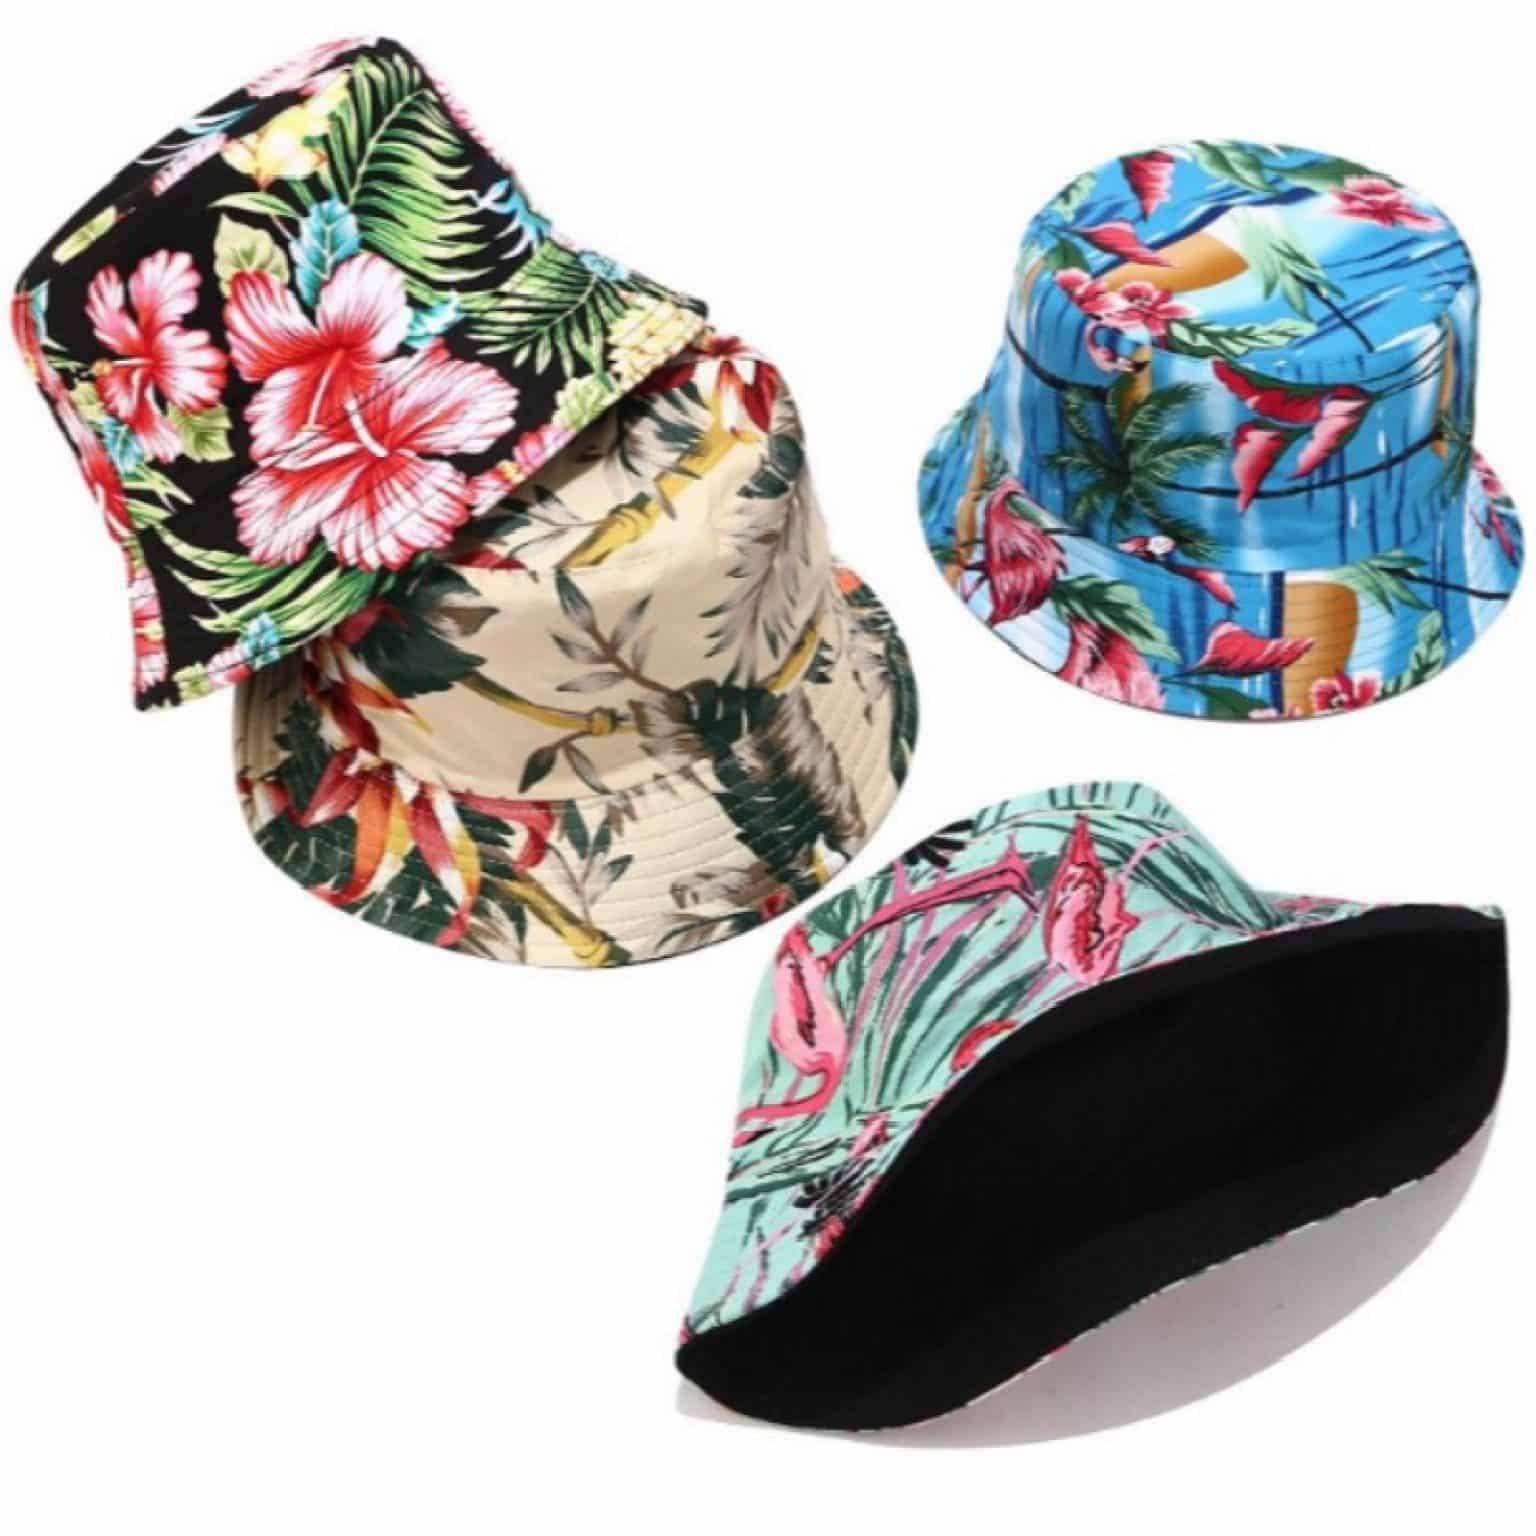 Leather Bucket Hat | Cheap Dad Hats For Sale | Best Hats for Men